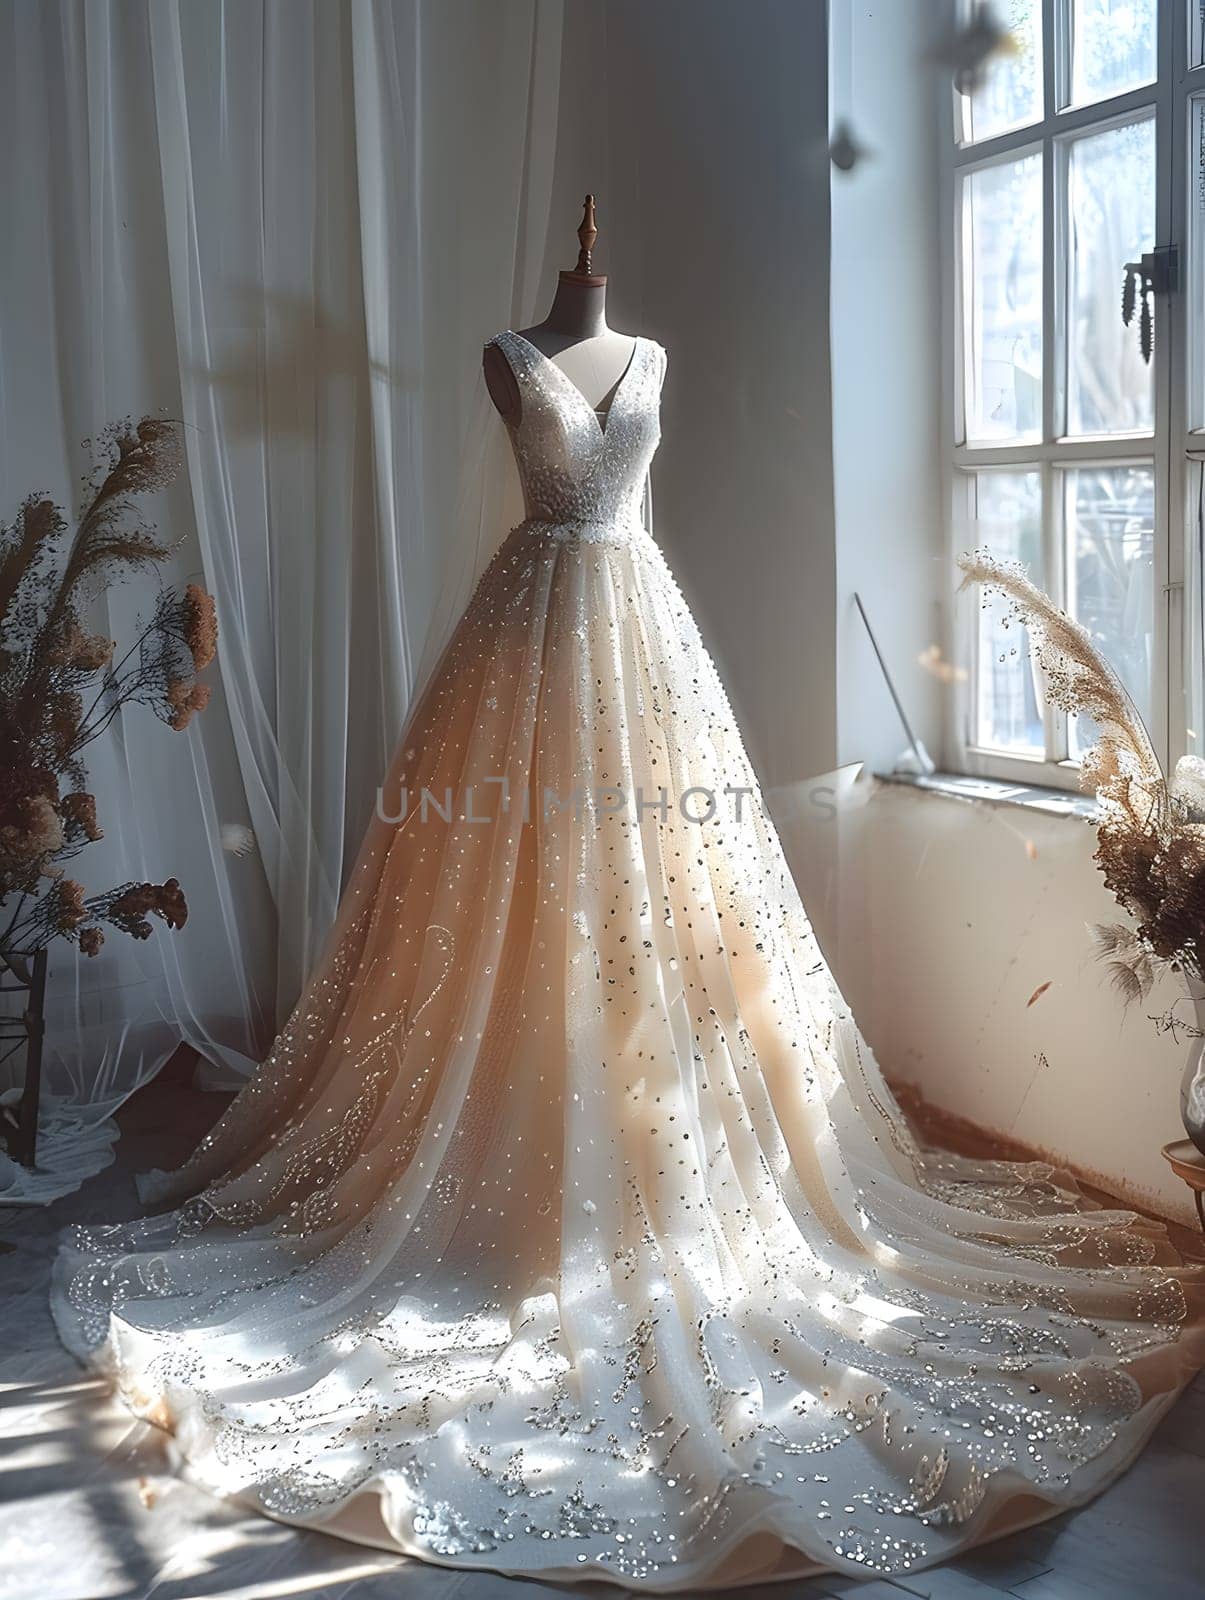 Wedding dress displayed on mannequin by window in fashion design studio by Nadtochiy